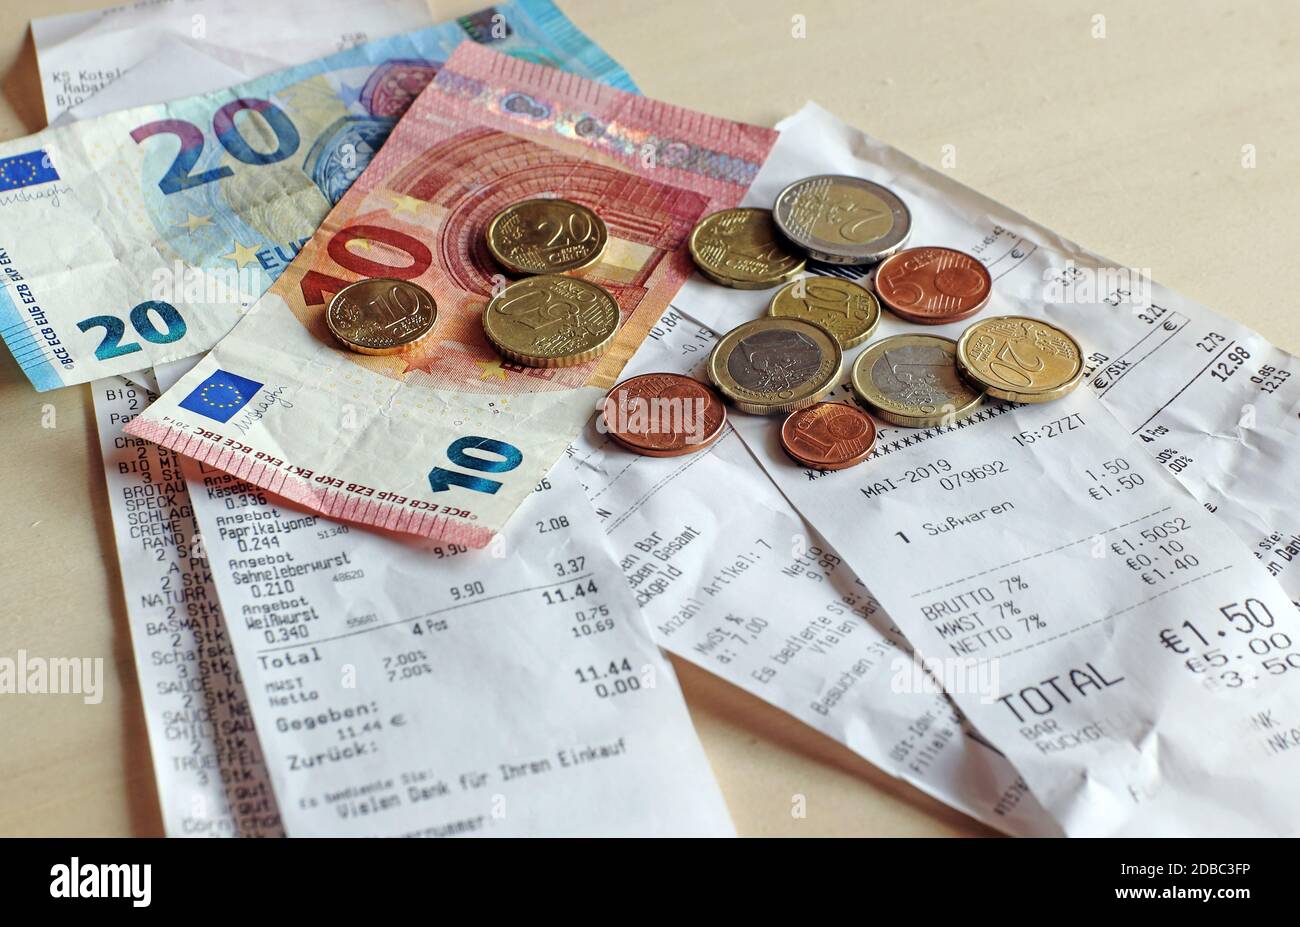 Money and bills. Cash receipt obligation in shops in Germany Stock Photo